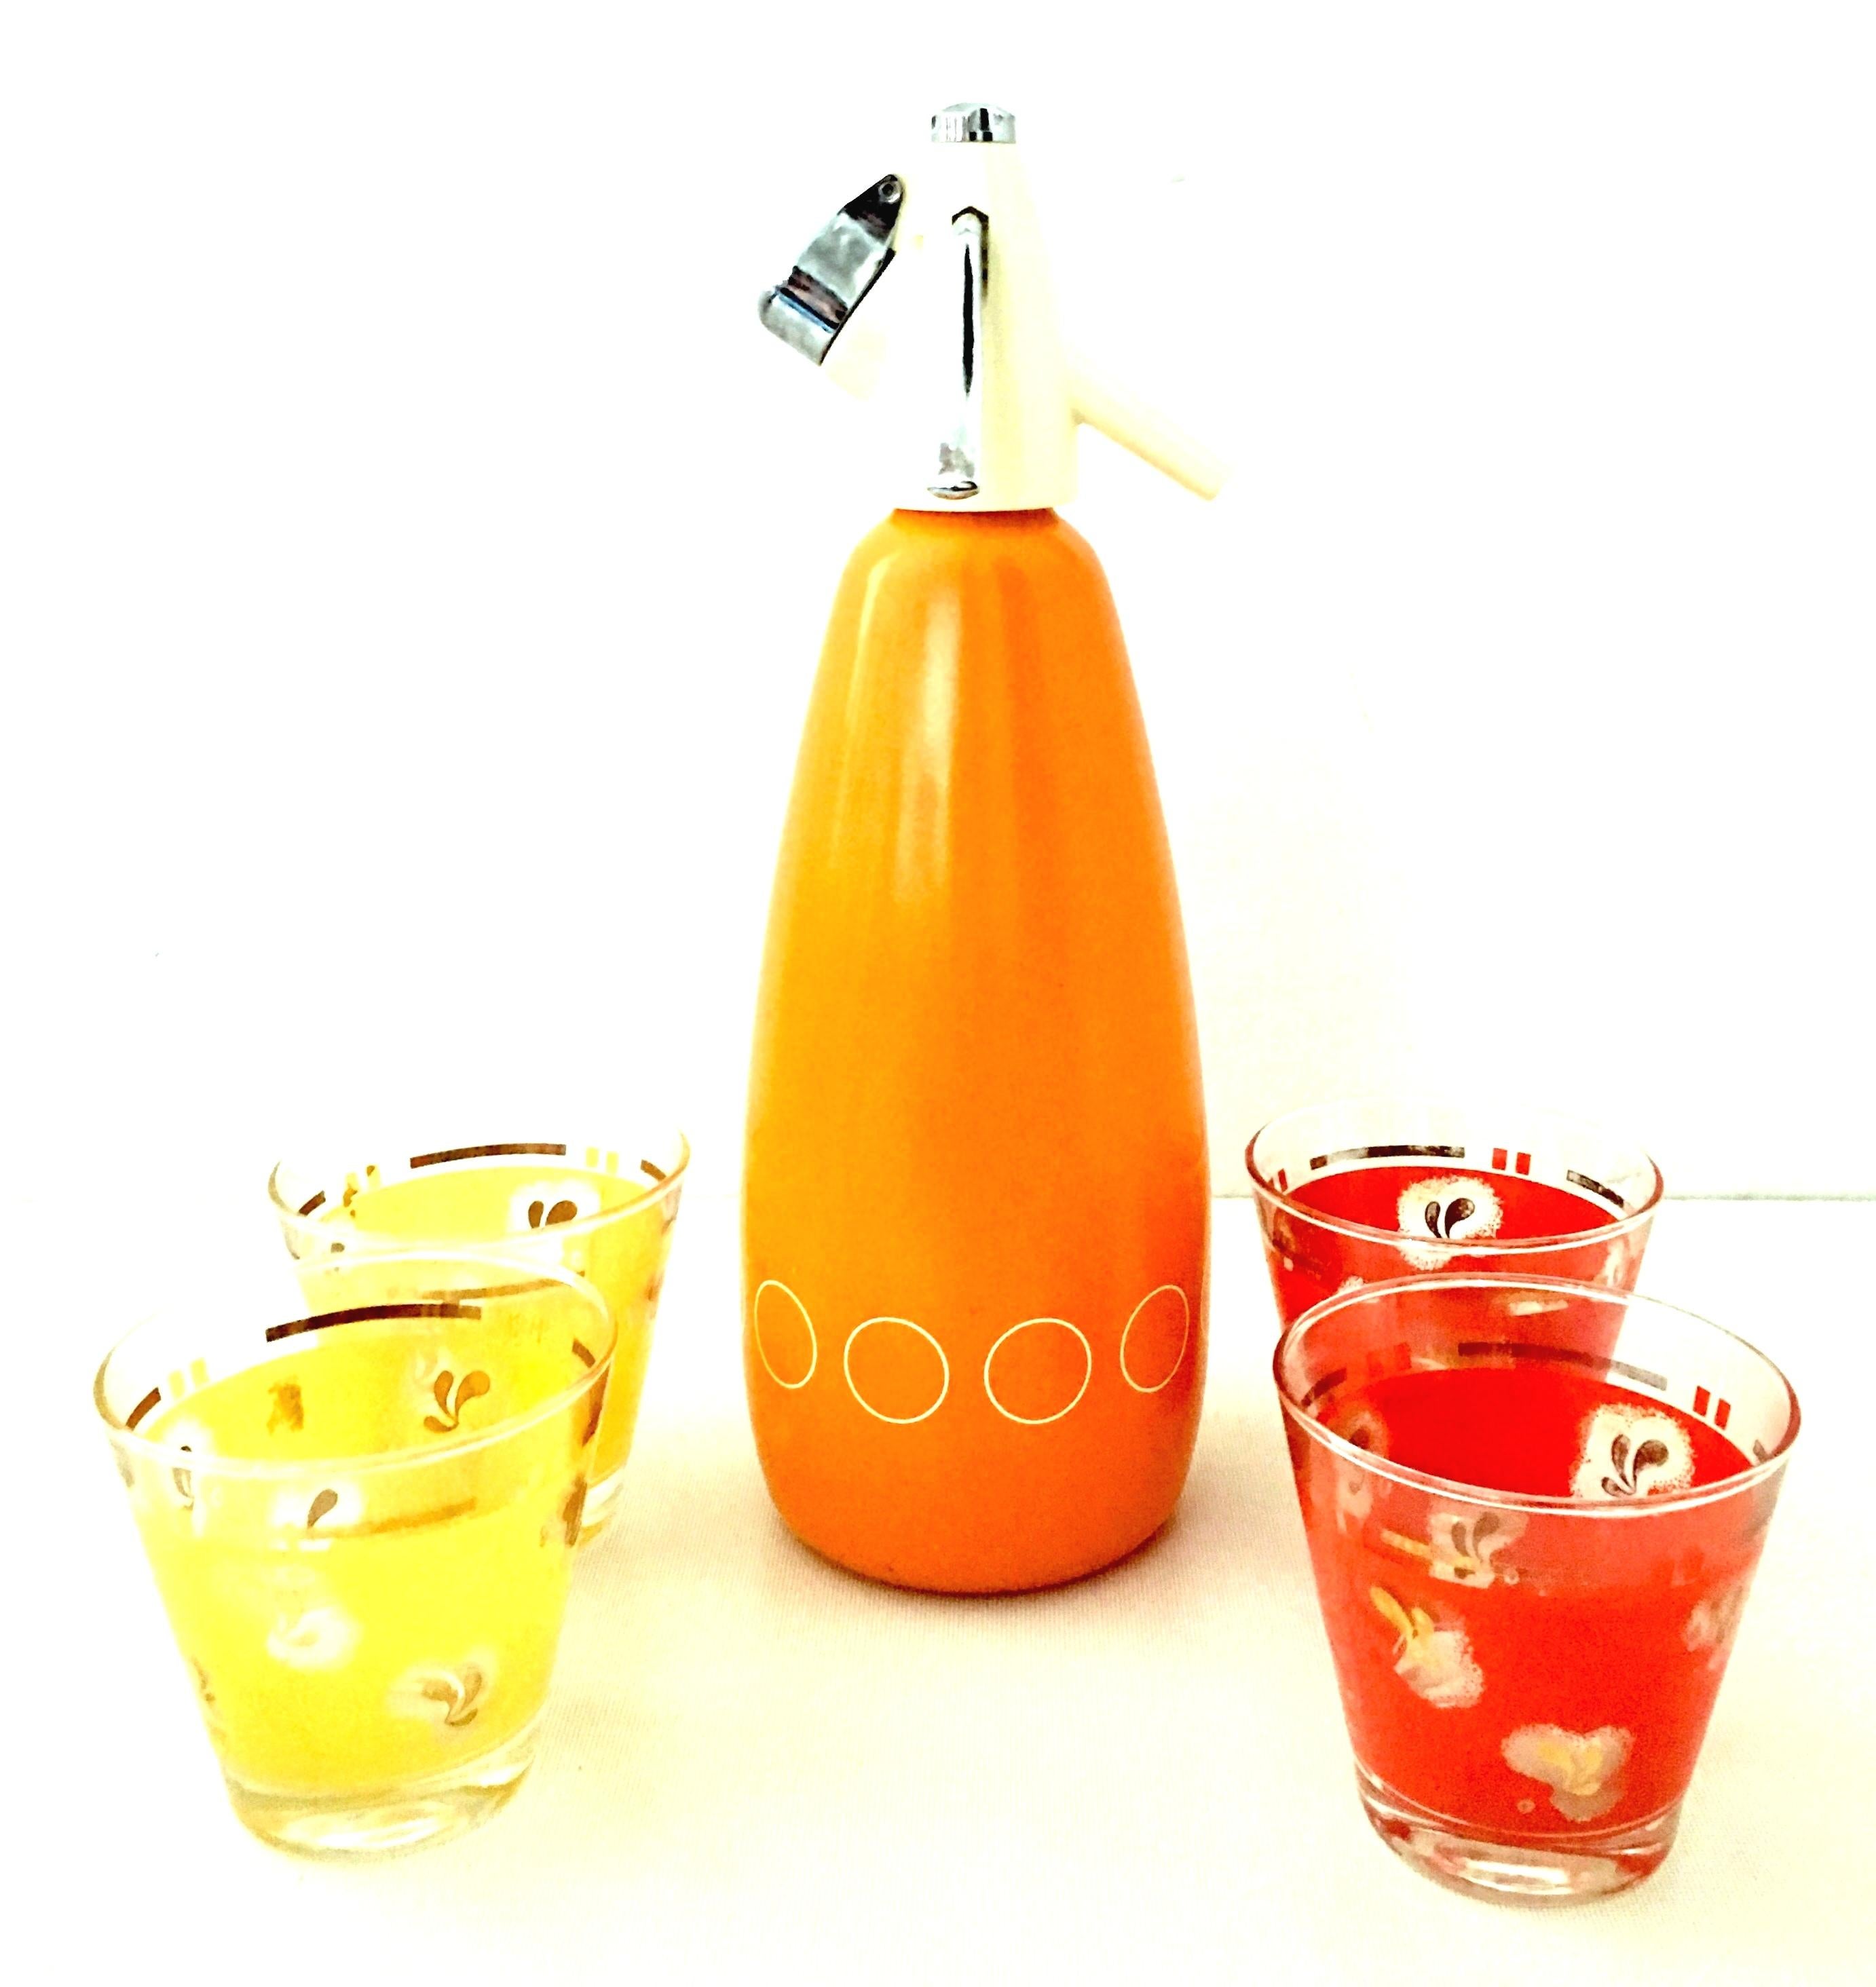 Mid-Century Modern English set of six-piece drinks set. Set includes one- two-piece enameled glass and chrome Siphon spritzer bottle and four printed double old fashion glasses. The orange enamel glass bottle features a fully operational chrome and